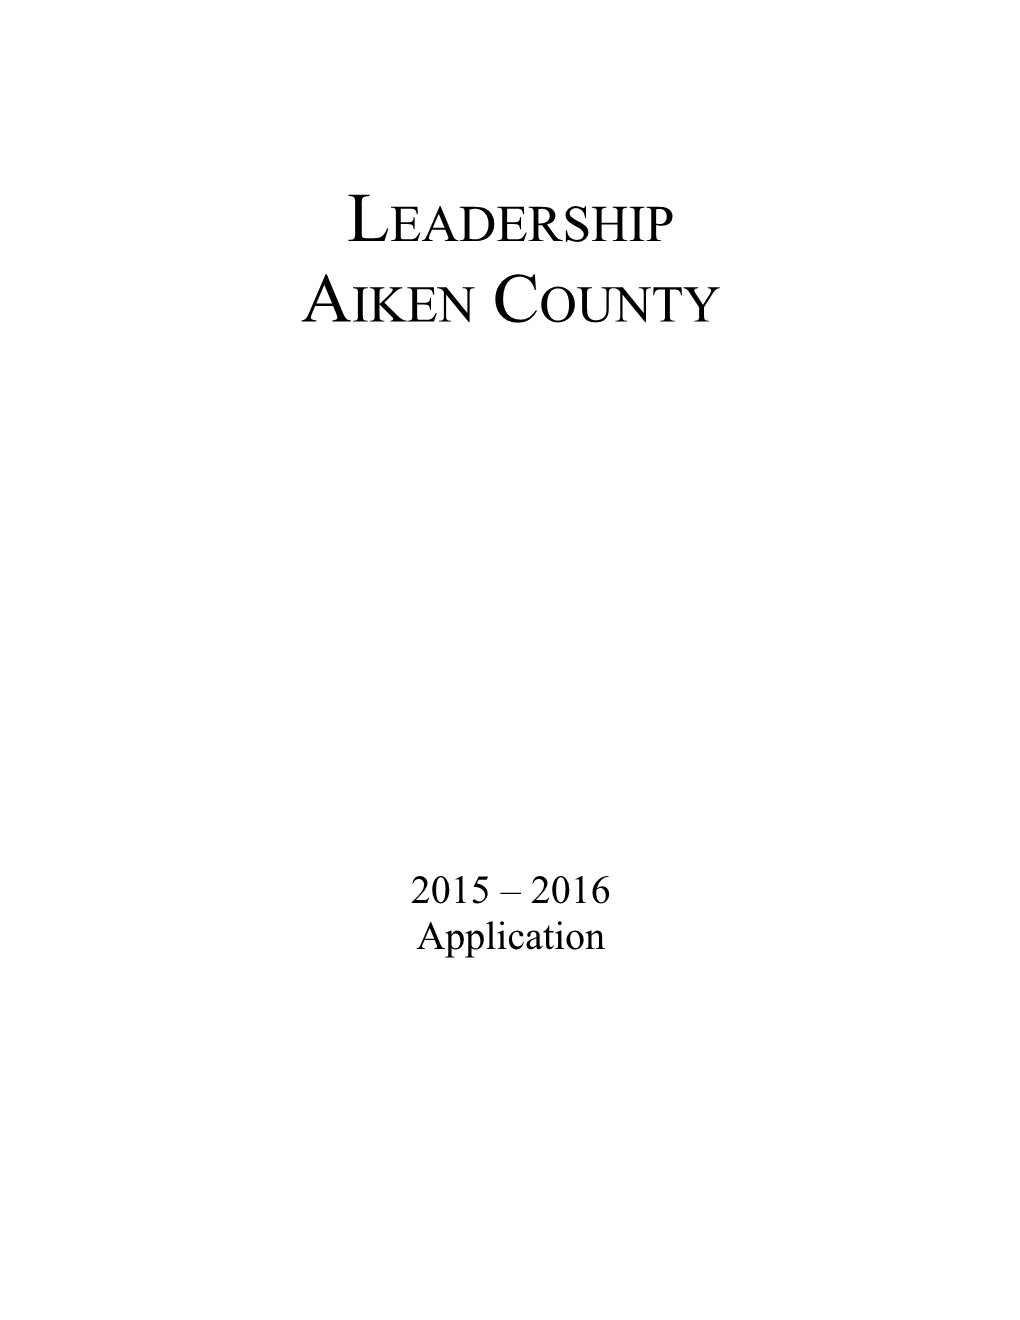 A Learning Experience Designed to Develop Leadership in Aikencounty Through Involvement